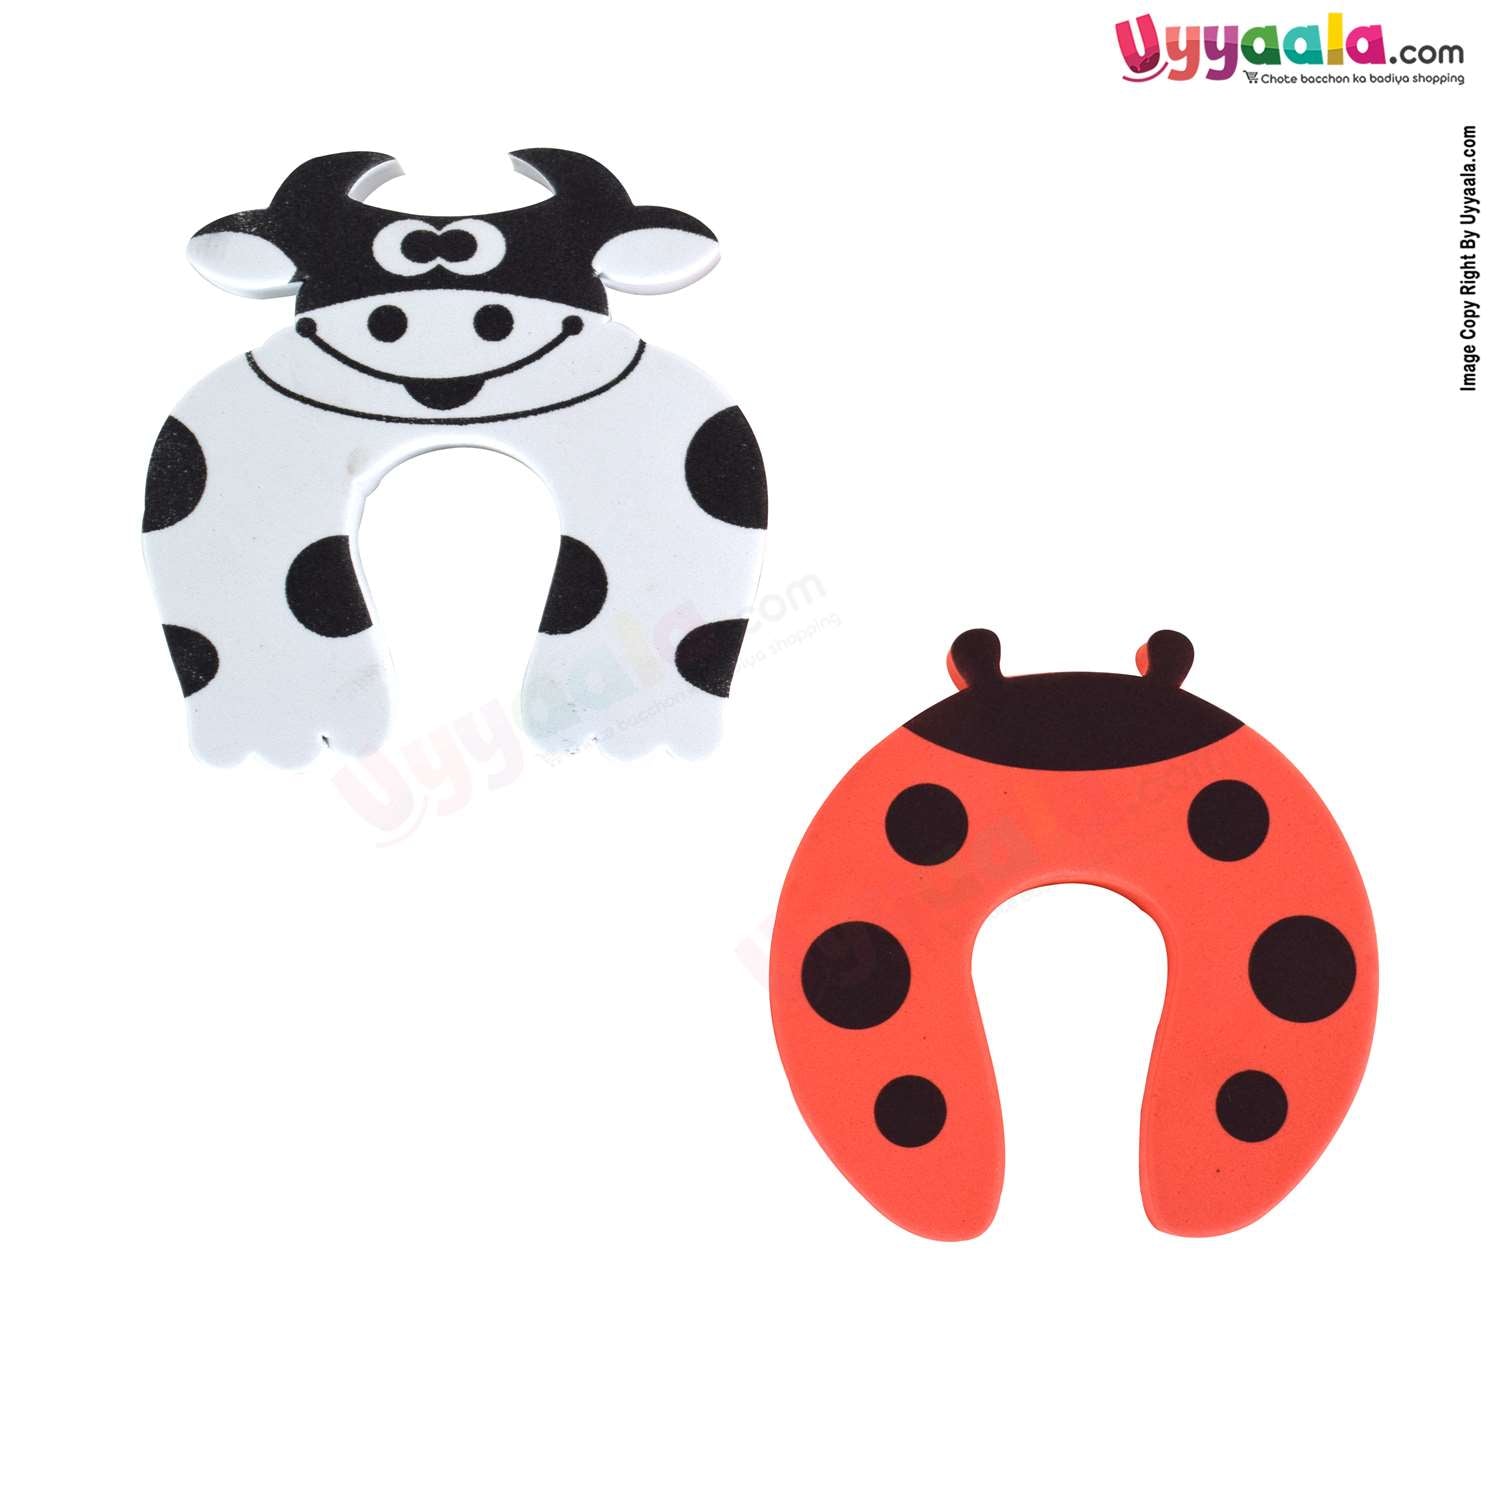 DR GYM Safety Corner Door Guard For Kids Safety With Animal Shapes, 2 pack- Red & White